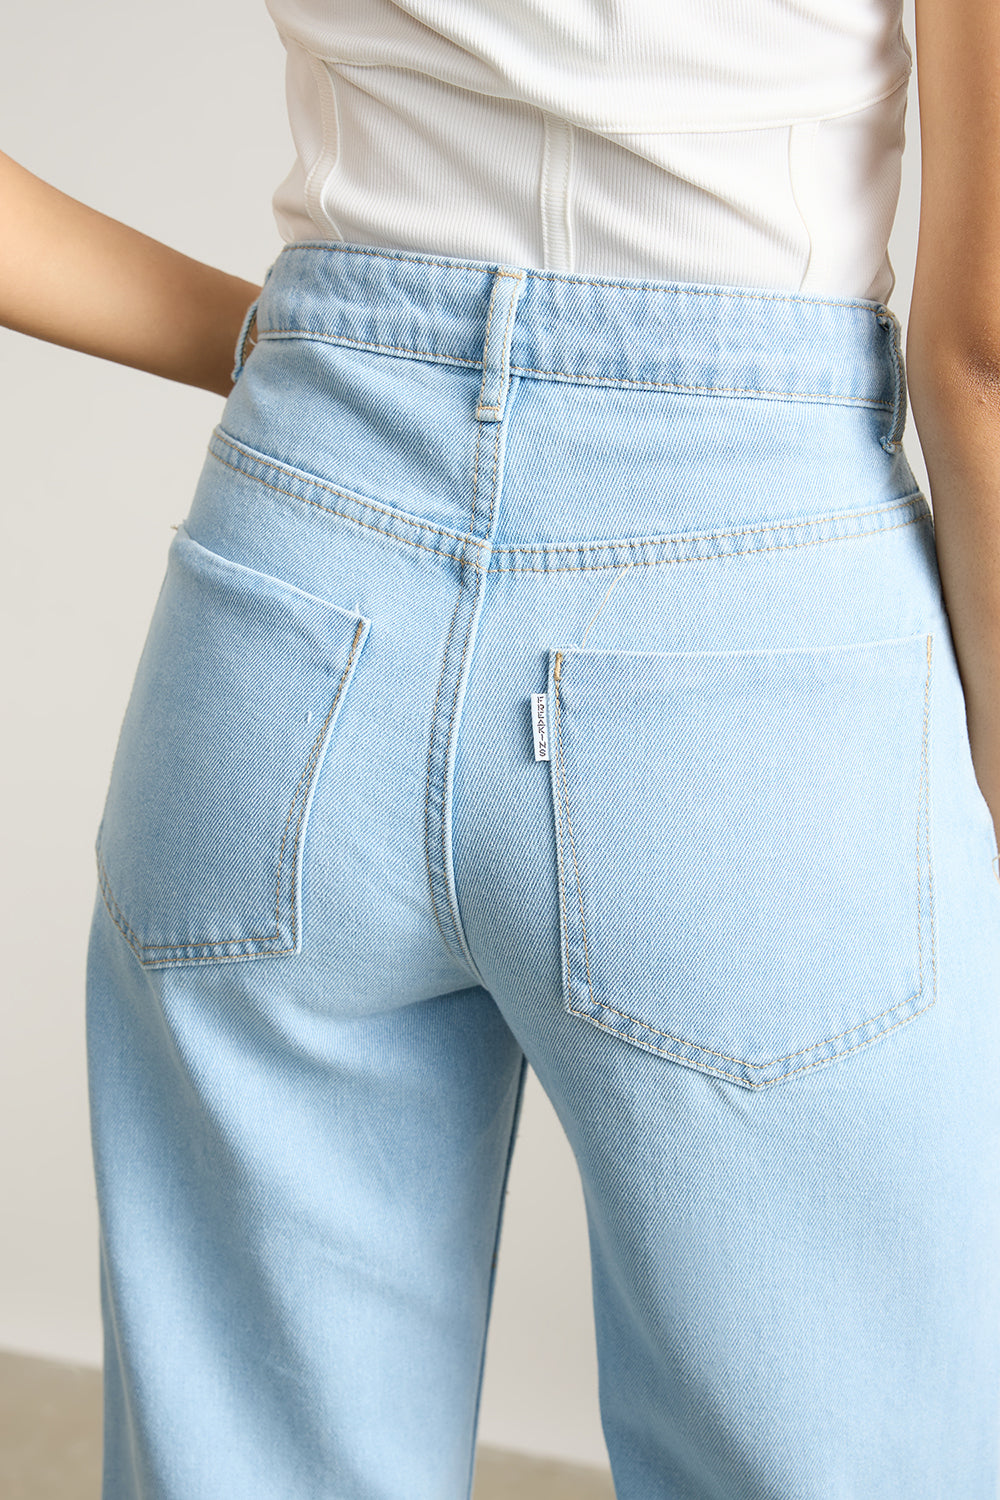 HIGH WAISTED DISTRESSED LIGHT BLUE JEANS